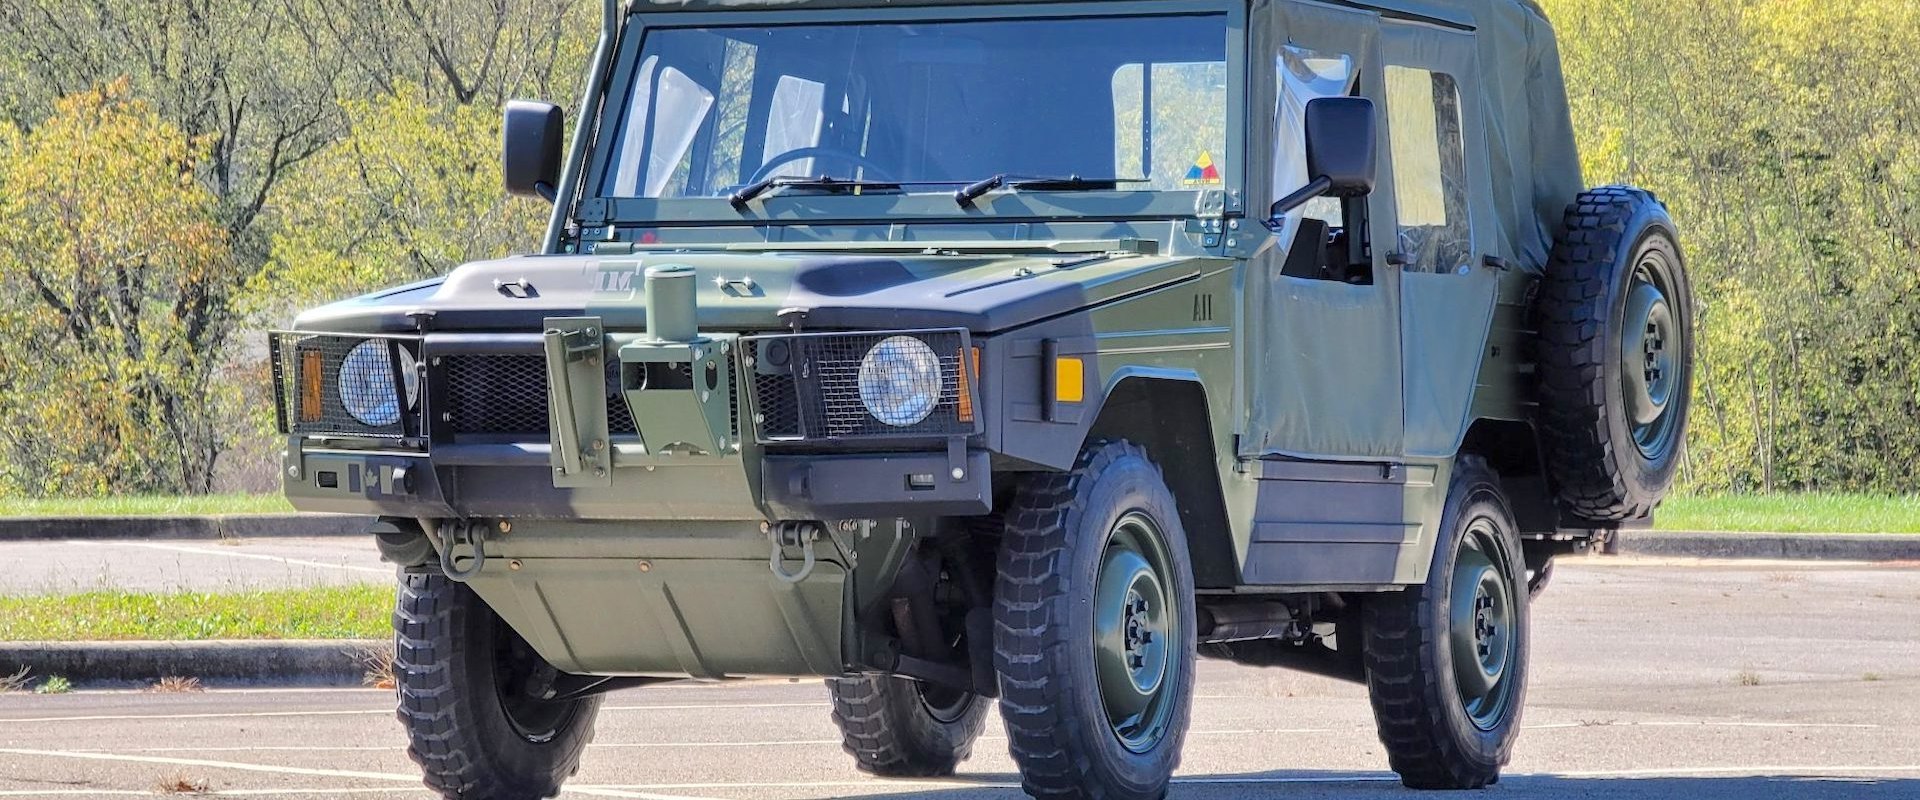 How Much Horsepower Does a Military Truck Have?